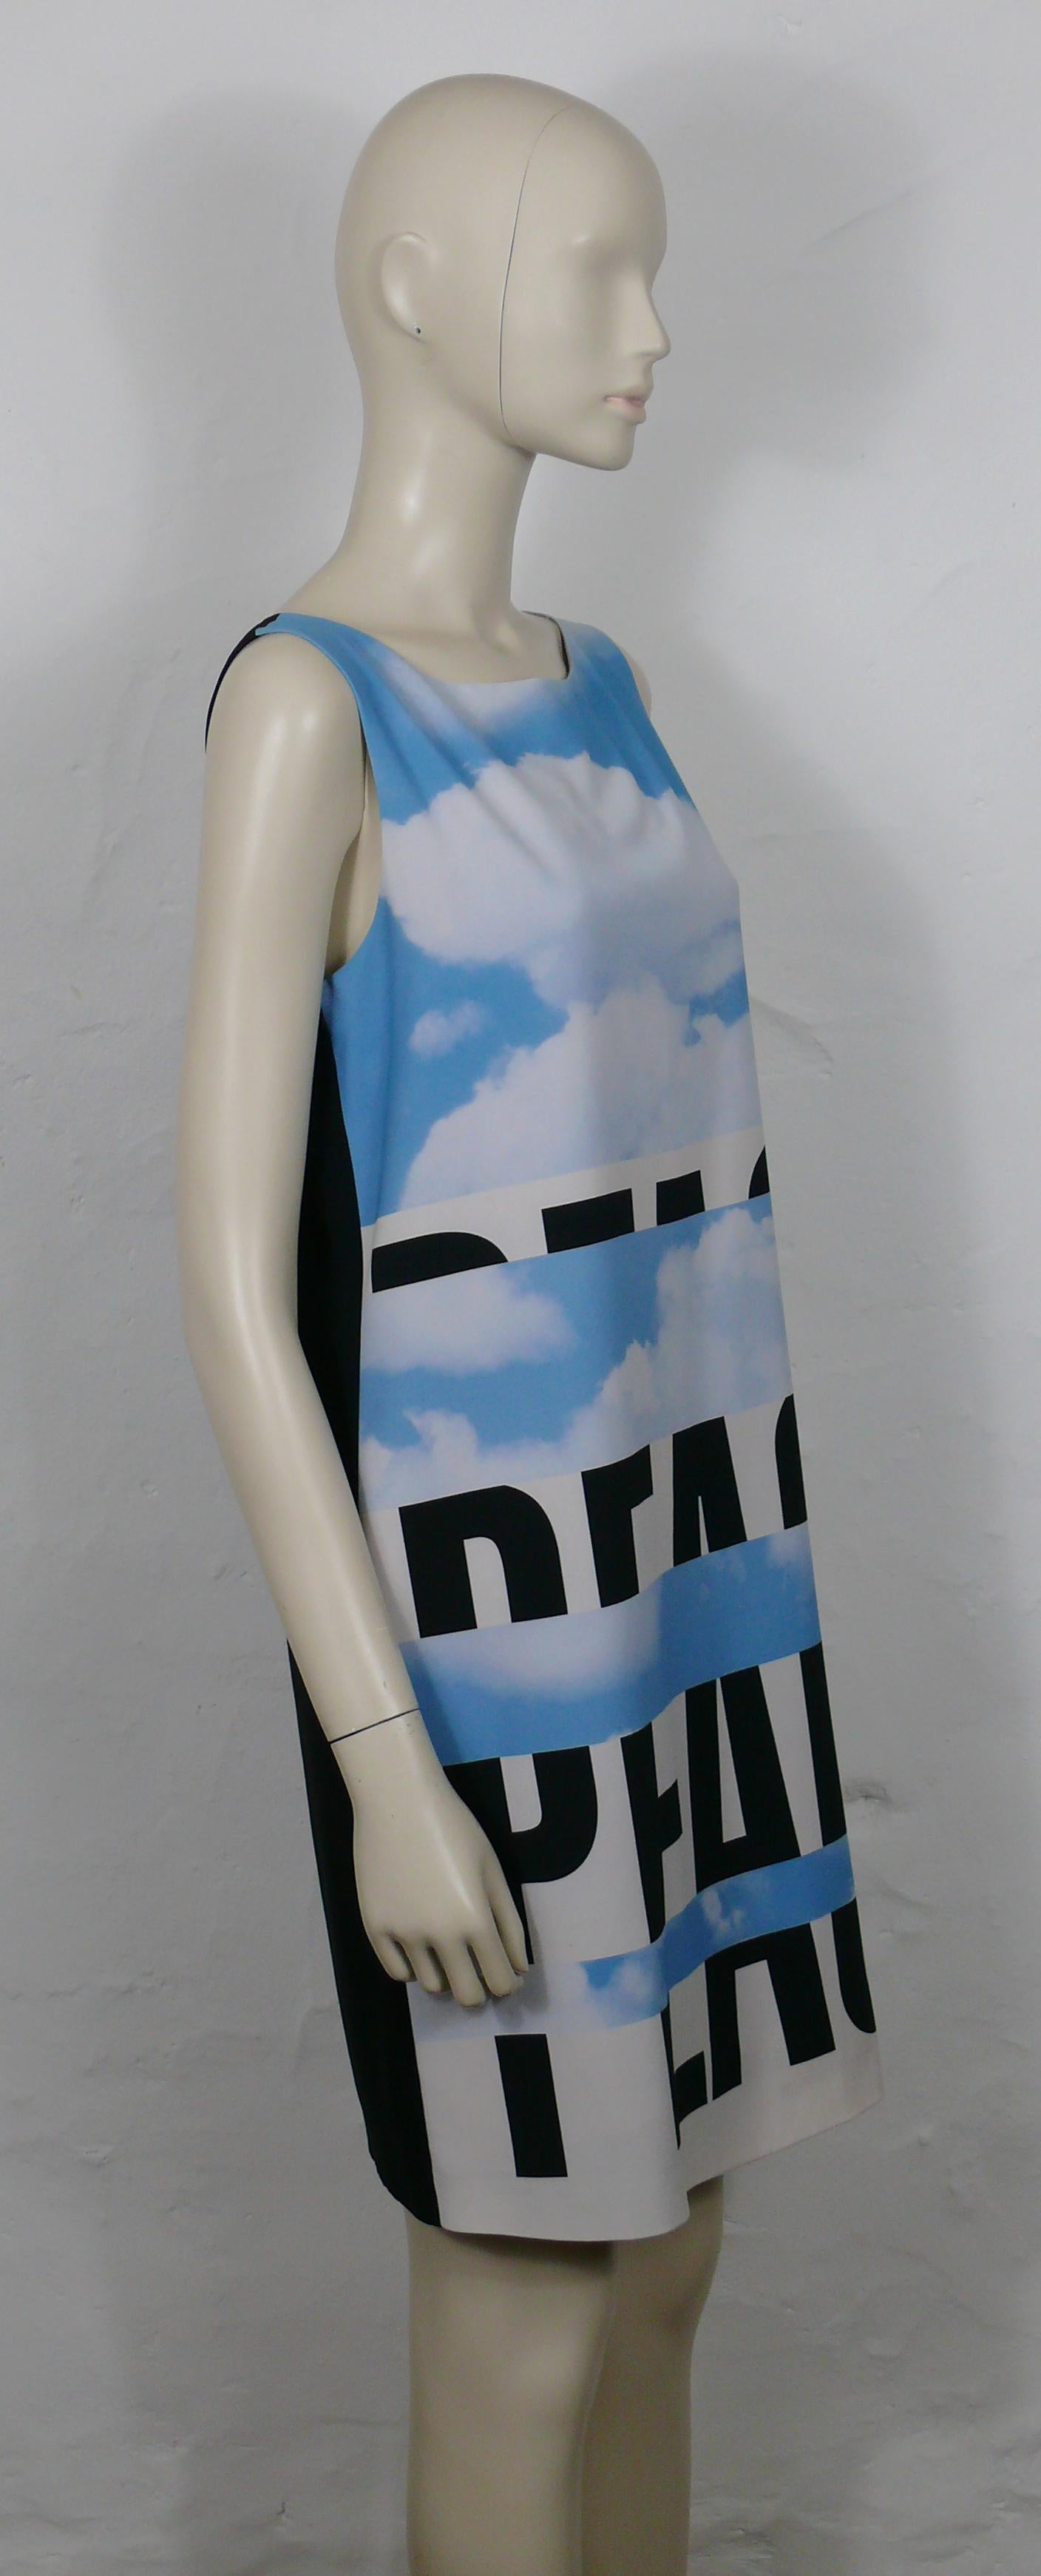 MOSCHINO Cheap and Chic sky blue cloud peace dress.

This dress features :
- A cloudy sky print with block PEACE lettering.
- Back black panel.
- Sleeveless.
- Fully lined.
- Hidden zippered back closure.

Label reads MOSCHINO CHEAP AND CHIC.
Made